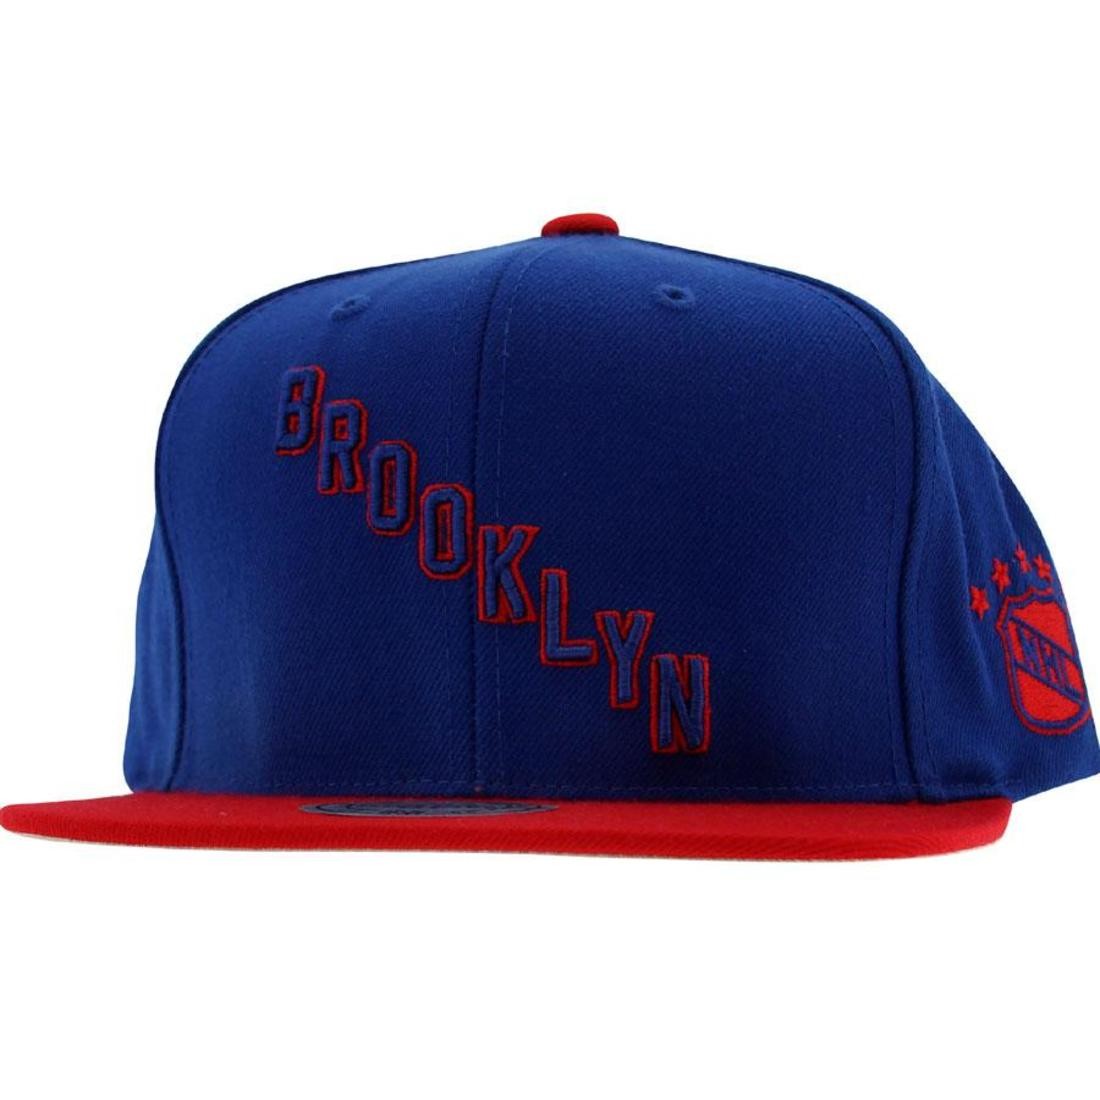 Mitchell And Ness Brooklyn Americans Retro Snapback Cap (blue / red)